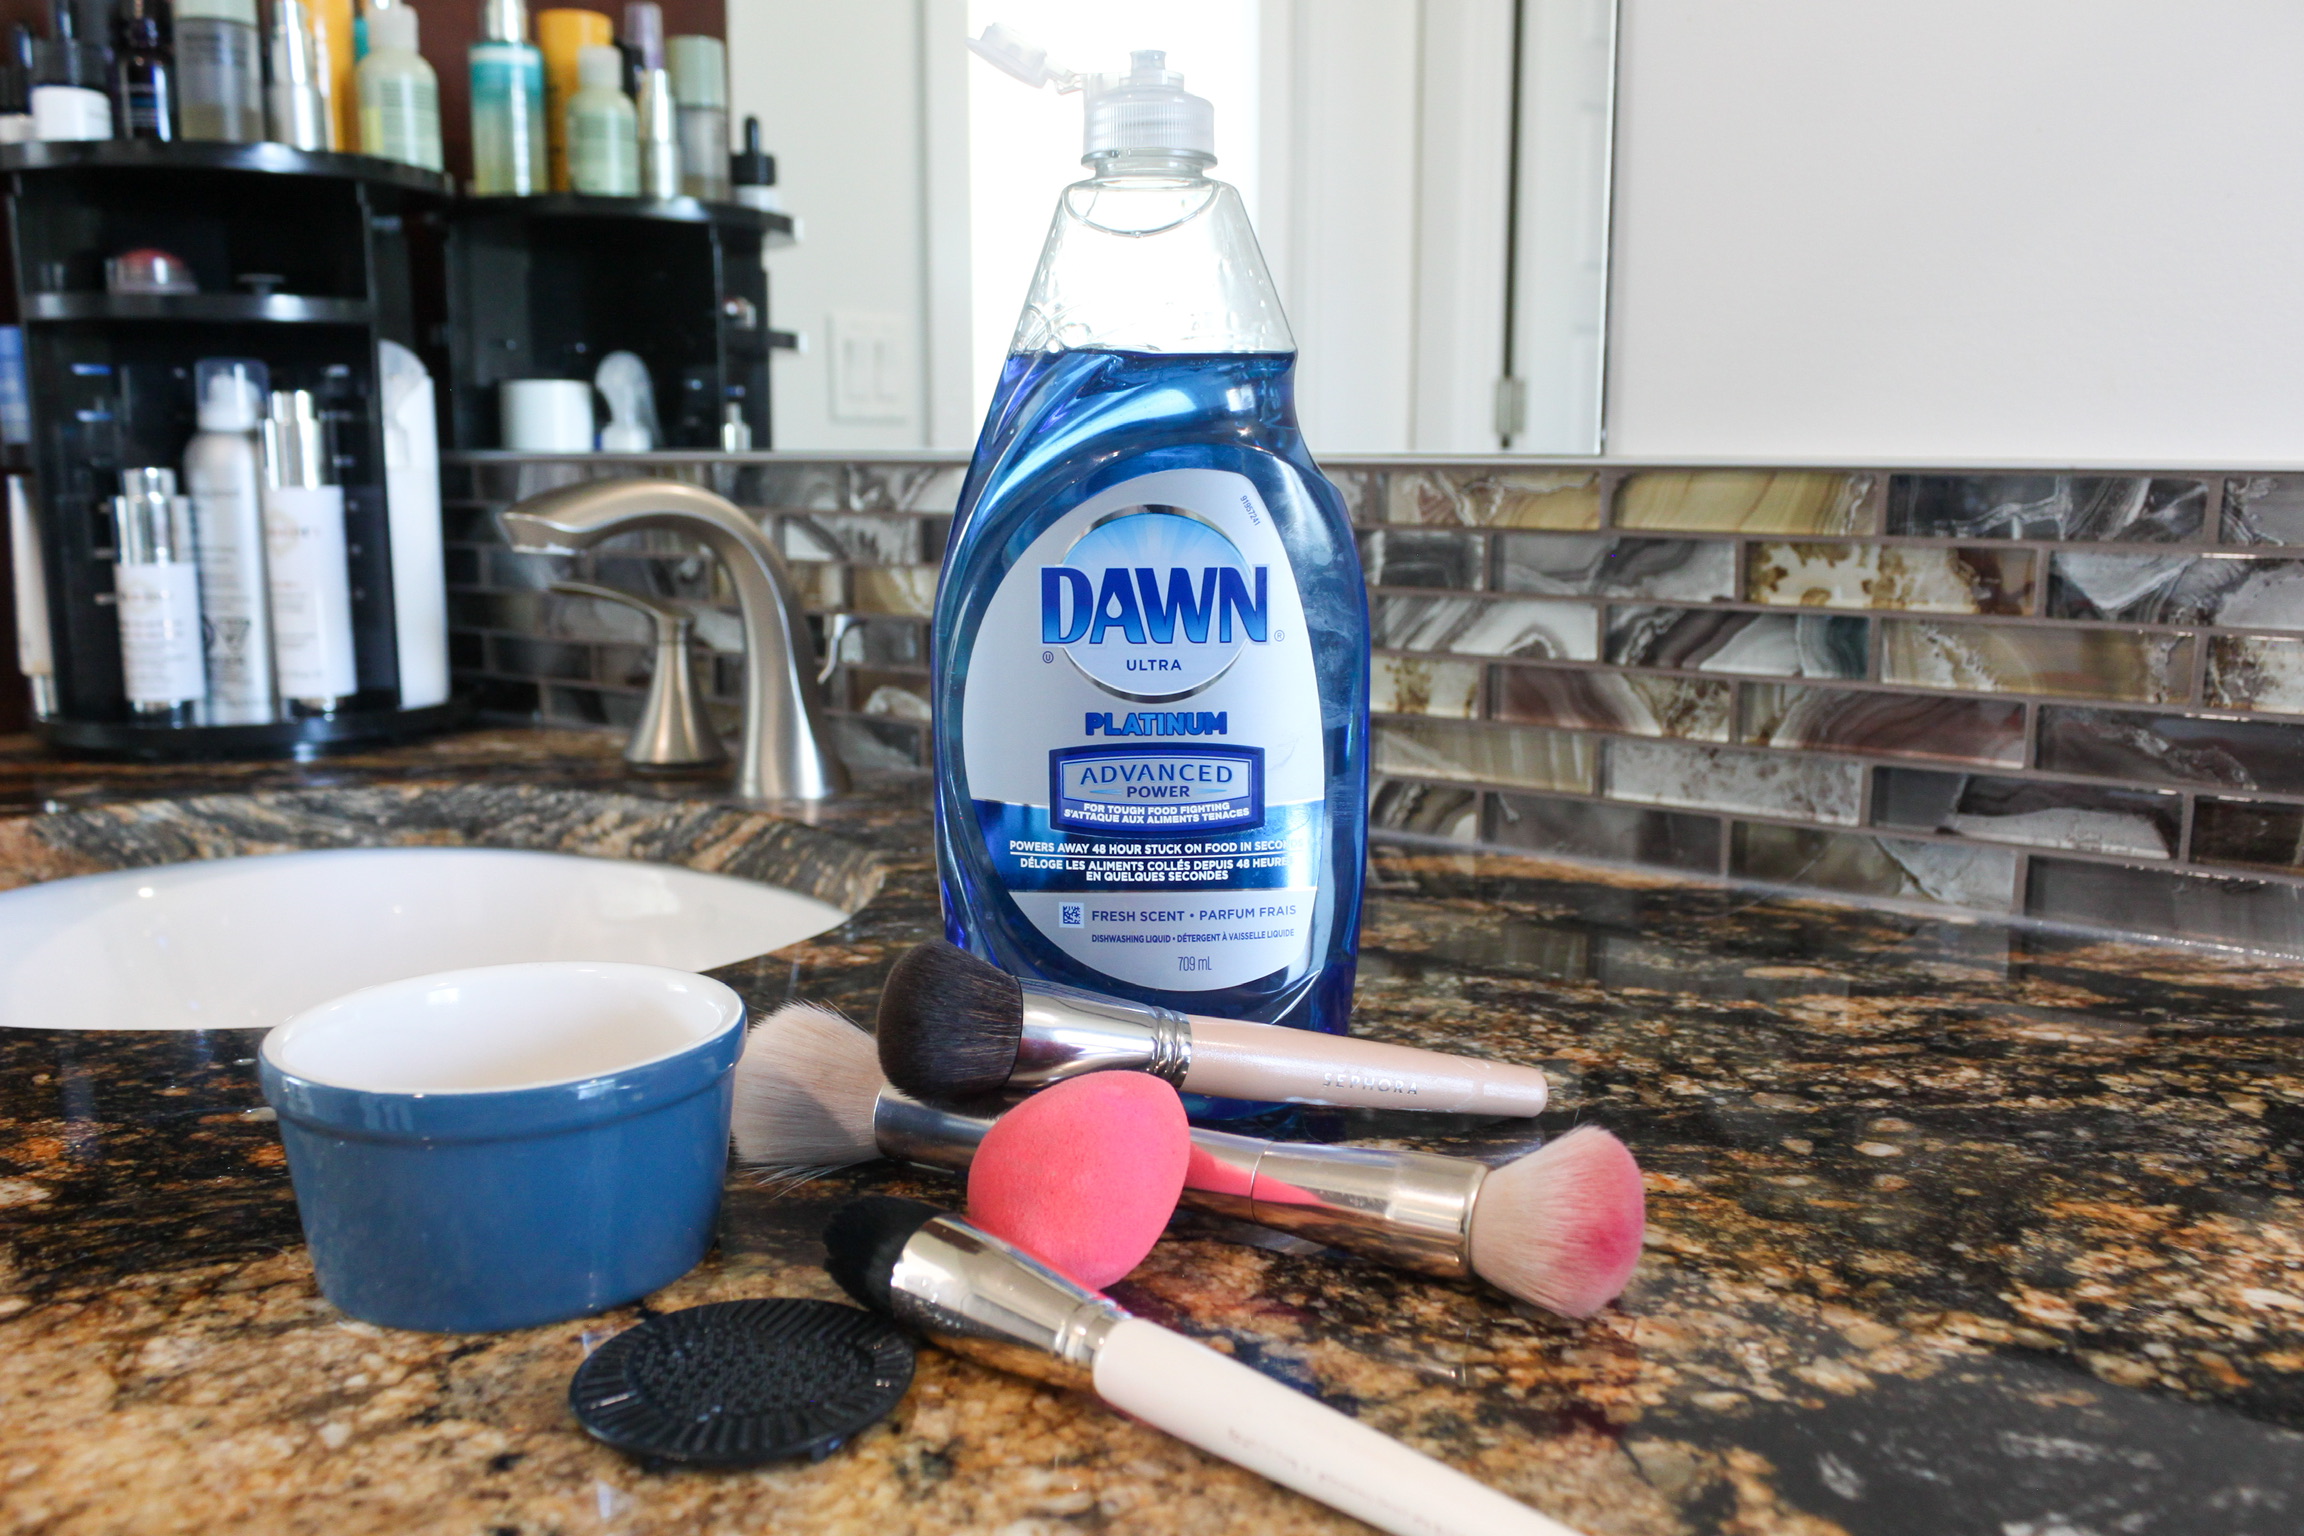 We Rated The Best Makeup Brush Cleaners And Machines!, Blog